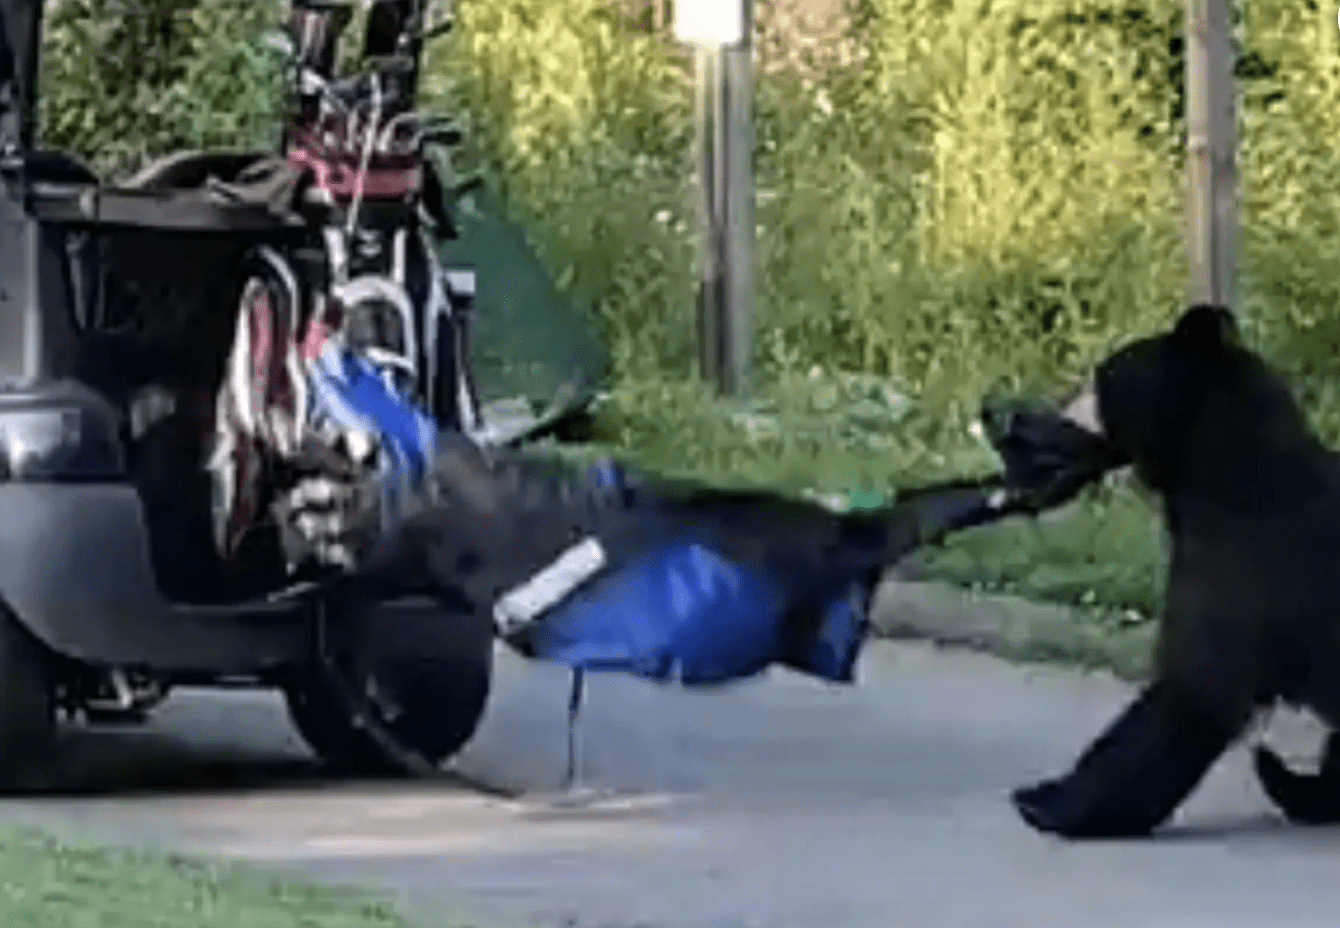 Bear pulls golf bag across pathway with mouth